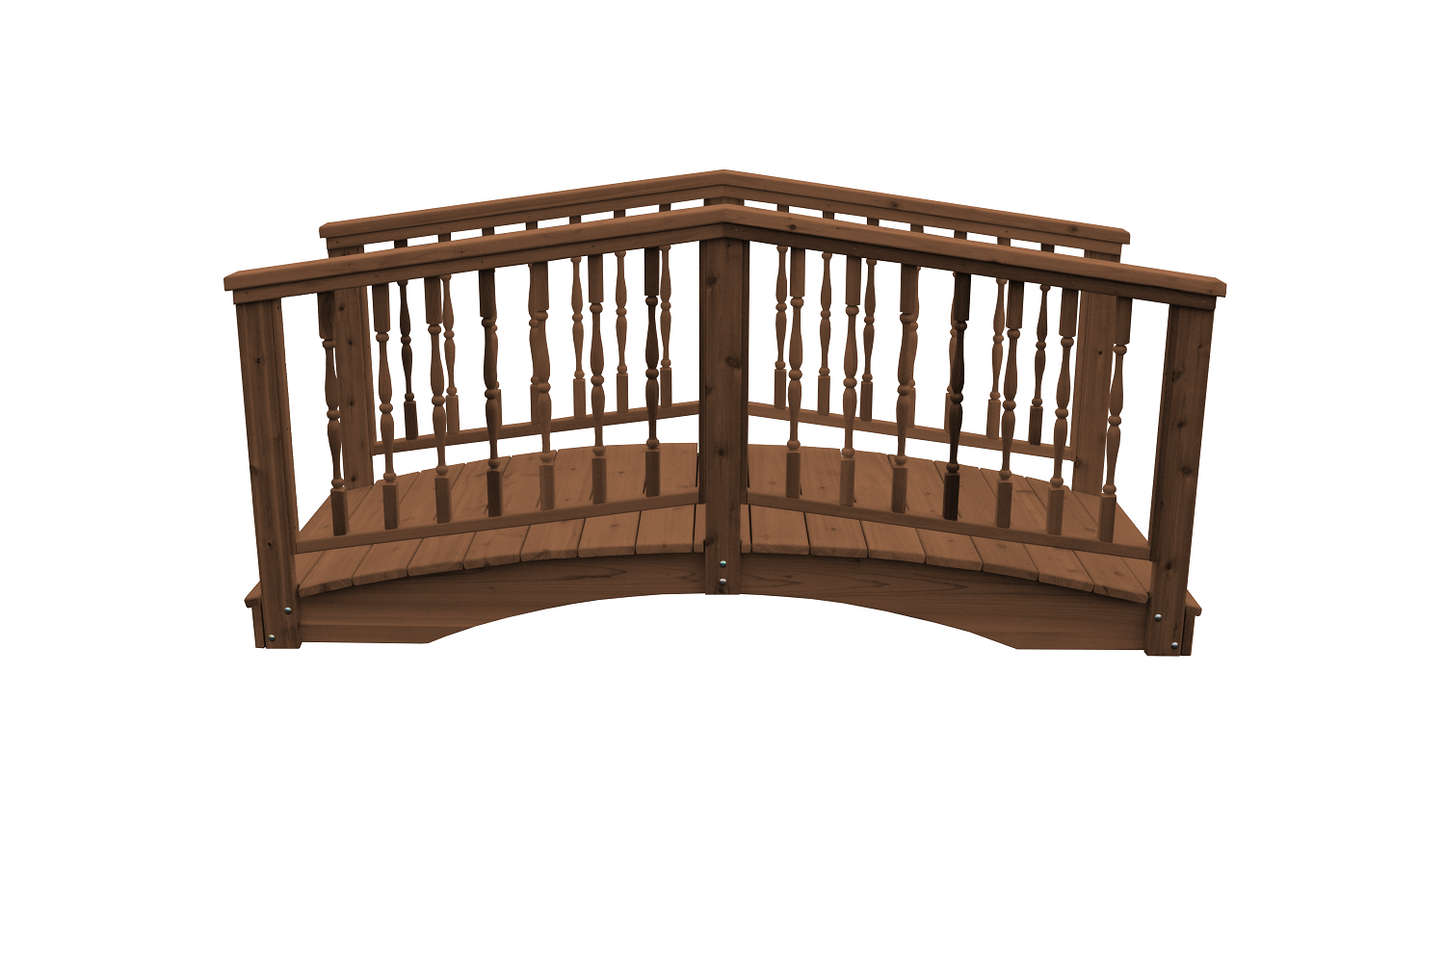 A&L Furniture Co. Western Red Cedar 3' x 12' Spindle Bridge - LEAD TIME TO SHIP 2 WEEKS